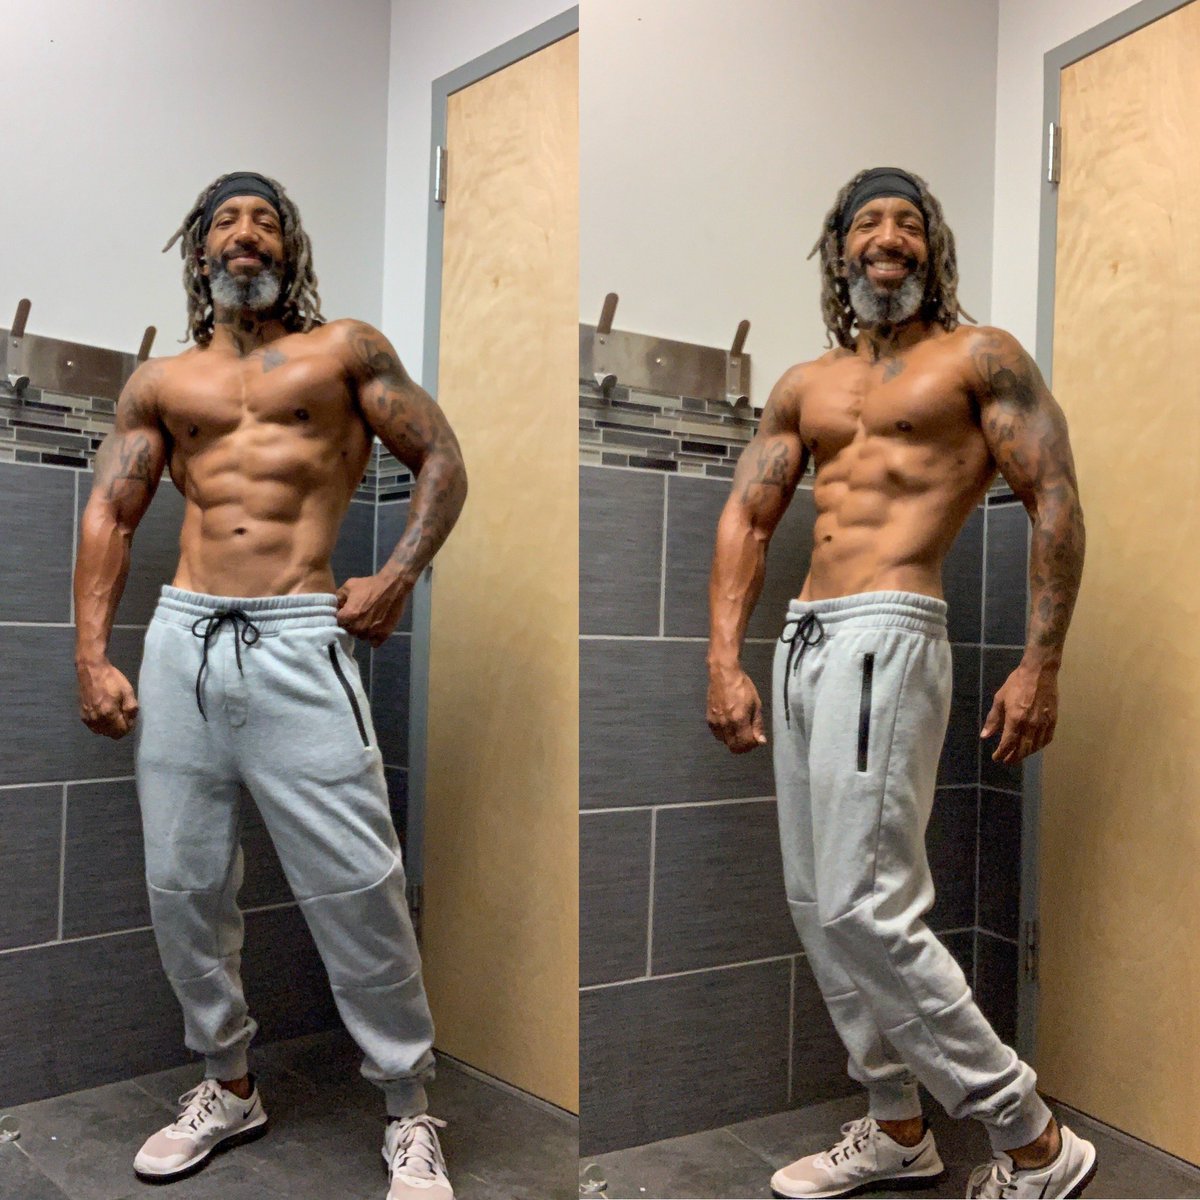 This is 45 💪🏽 #flexfriday #muscles #over40fitness #FridayMotivation #NIKESPORTSWEAR #simplyshredded #grayhairdontcare #menwithlocs #FitnessModel #Philly #armystrong #armyvet #abcheck #trainwiththechief #BeardGang #TheMarathonContinues #victorylap #ShabbatShalom